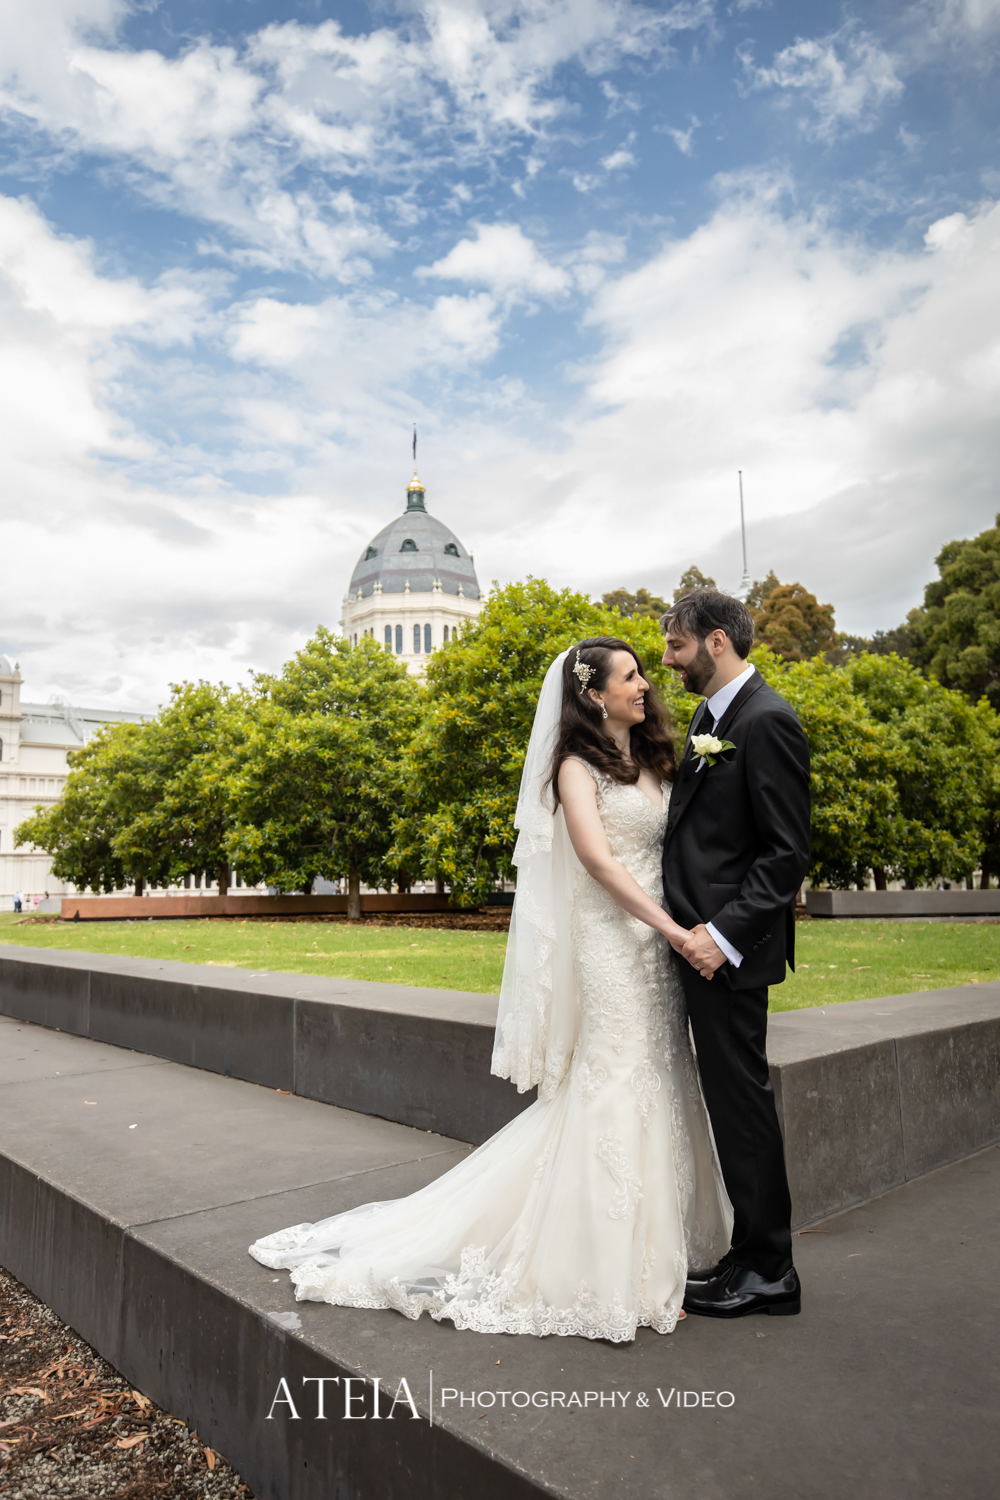 , Lakeside Receptions Wedding Photography Melbourne by ATEIA Photography &#038; Video